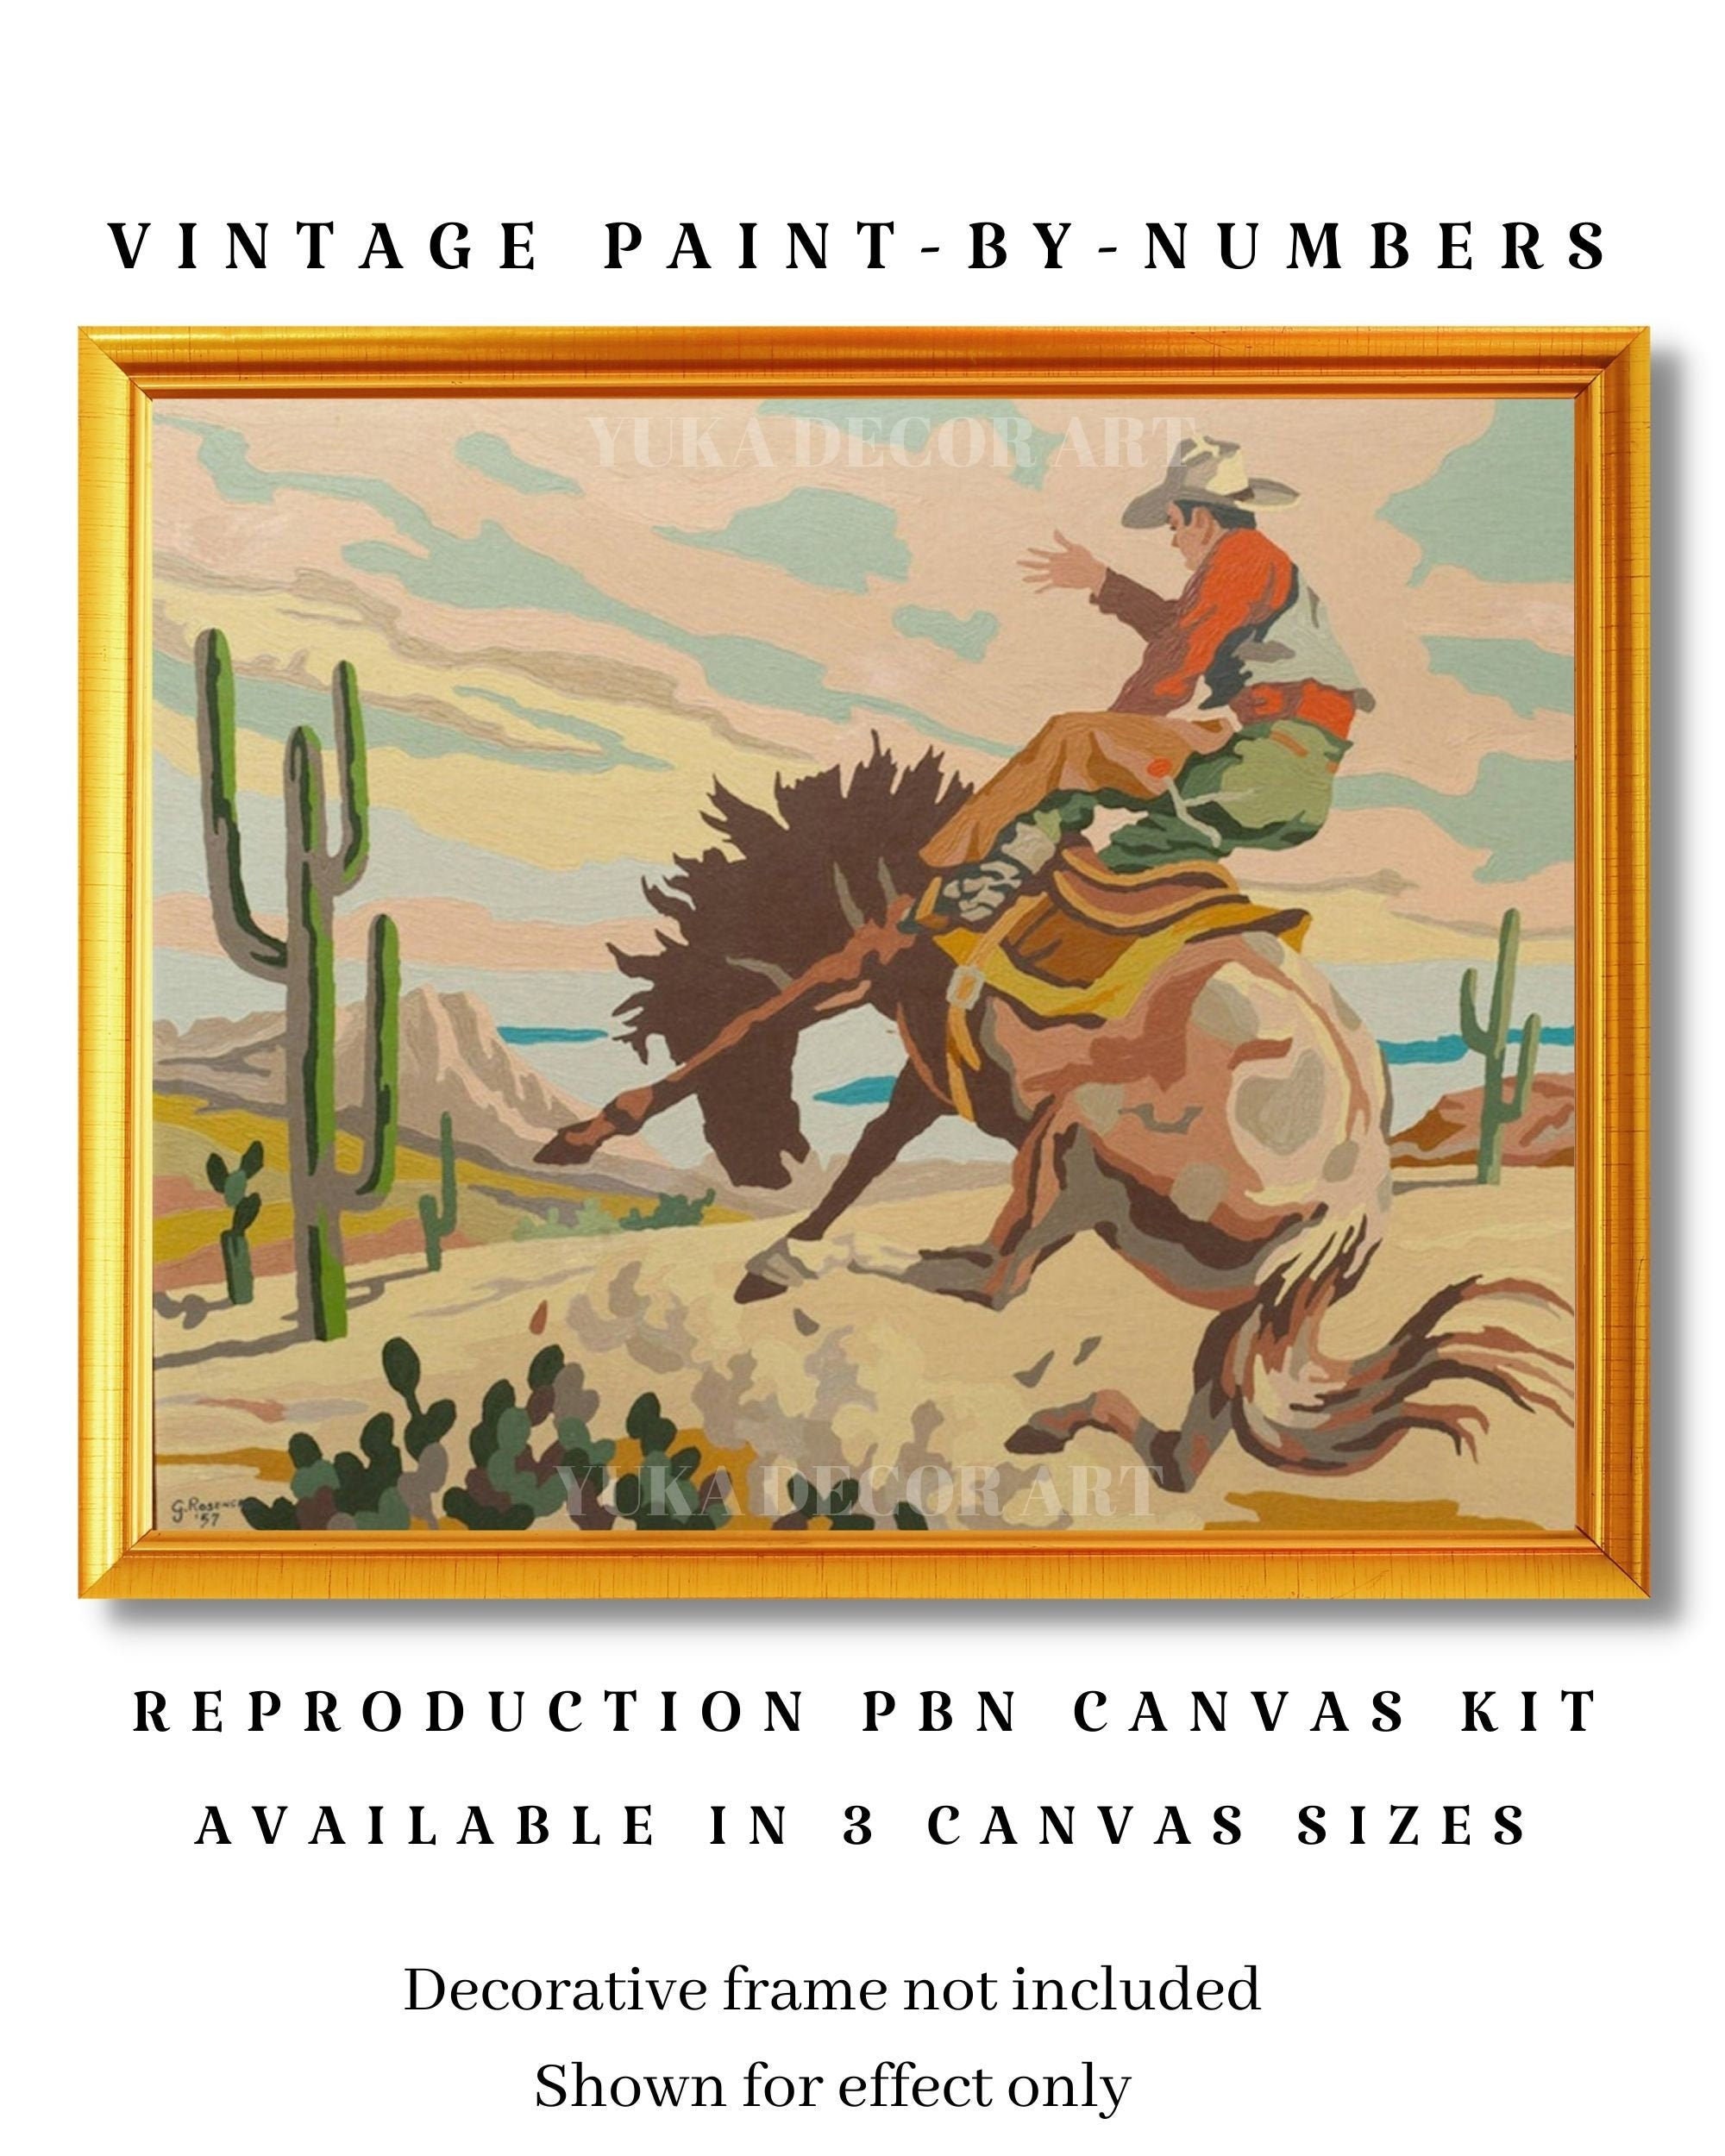 Vintage paint by numbers for adults